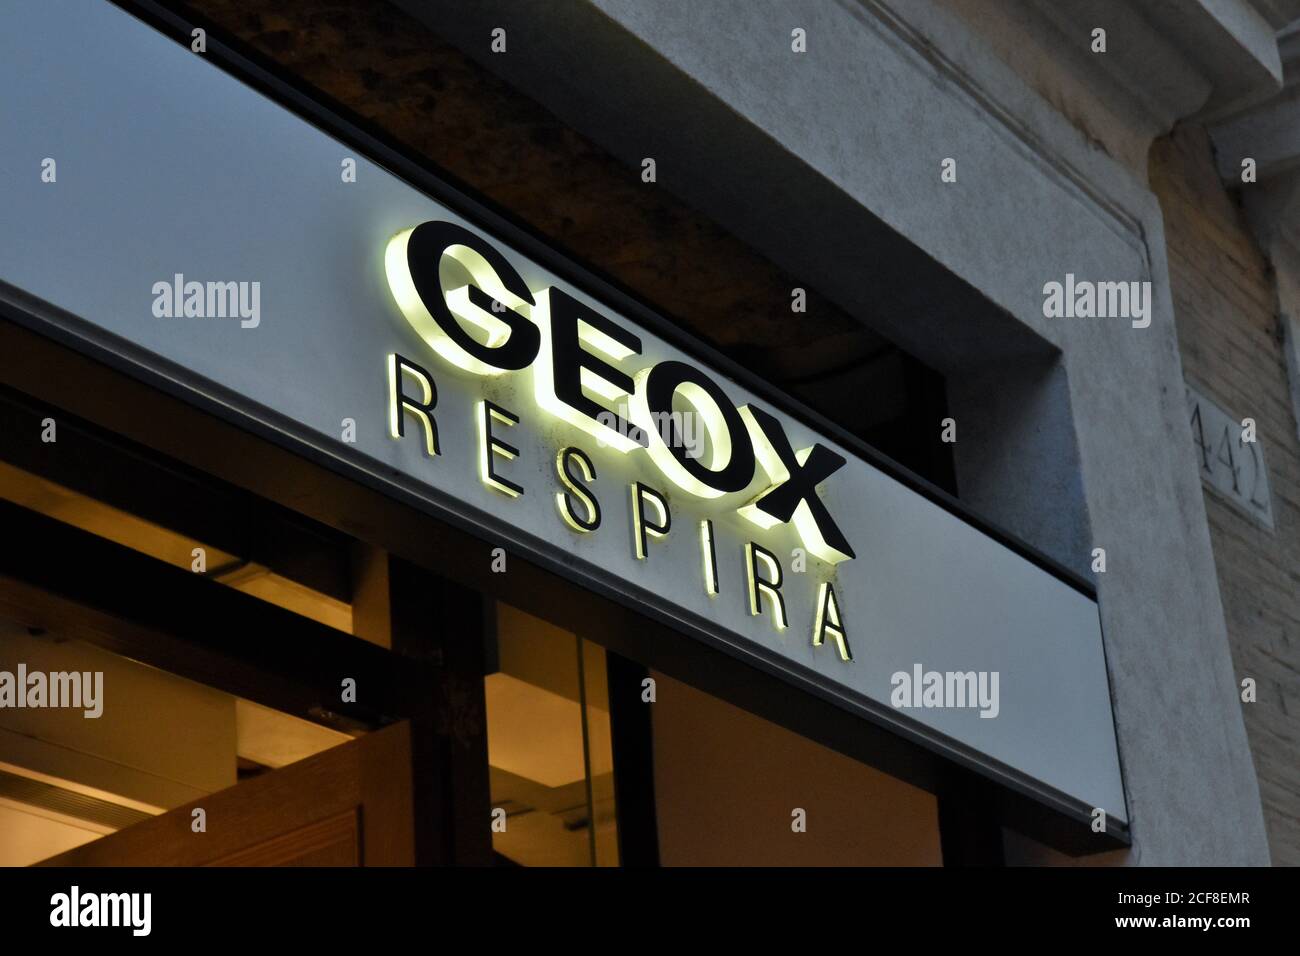 THE SIGN OF THE GEOX BOUTIQUE Stock Photo - Alamy